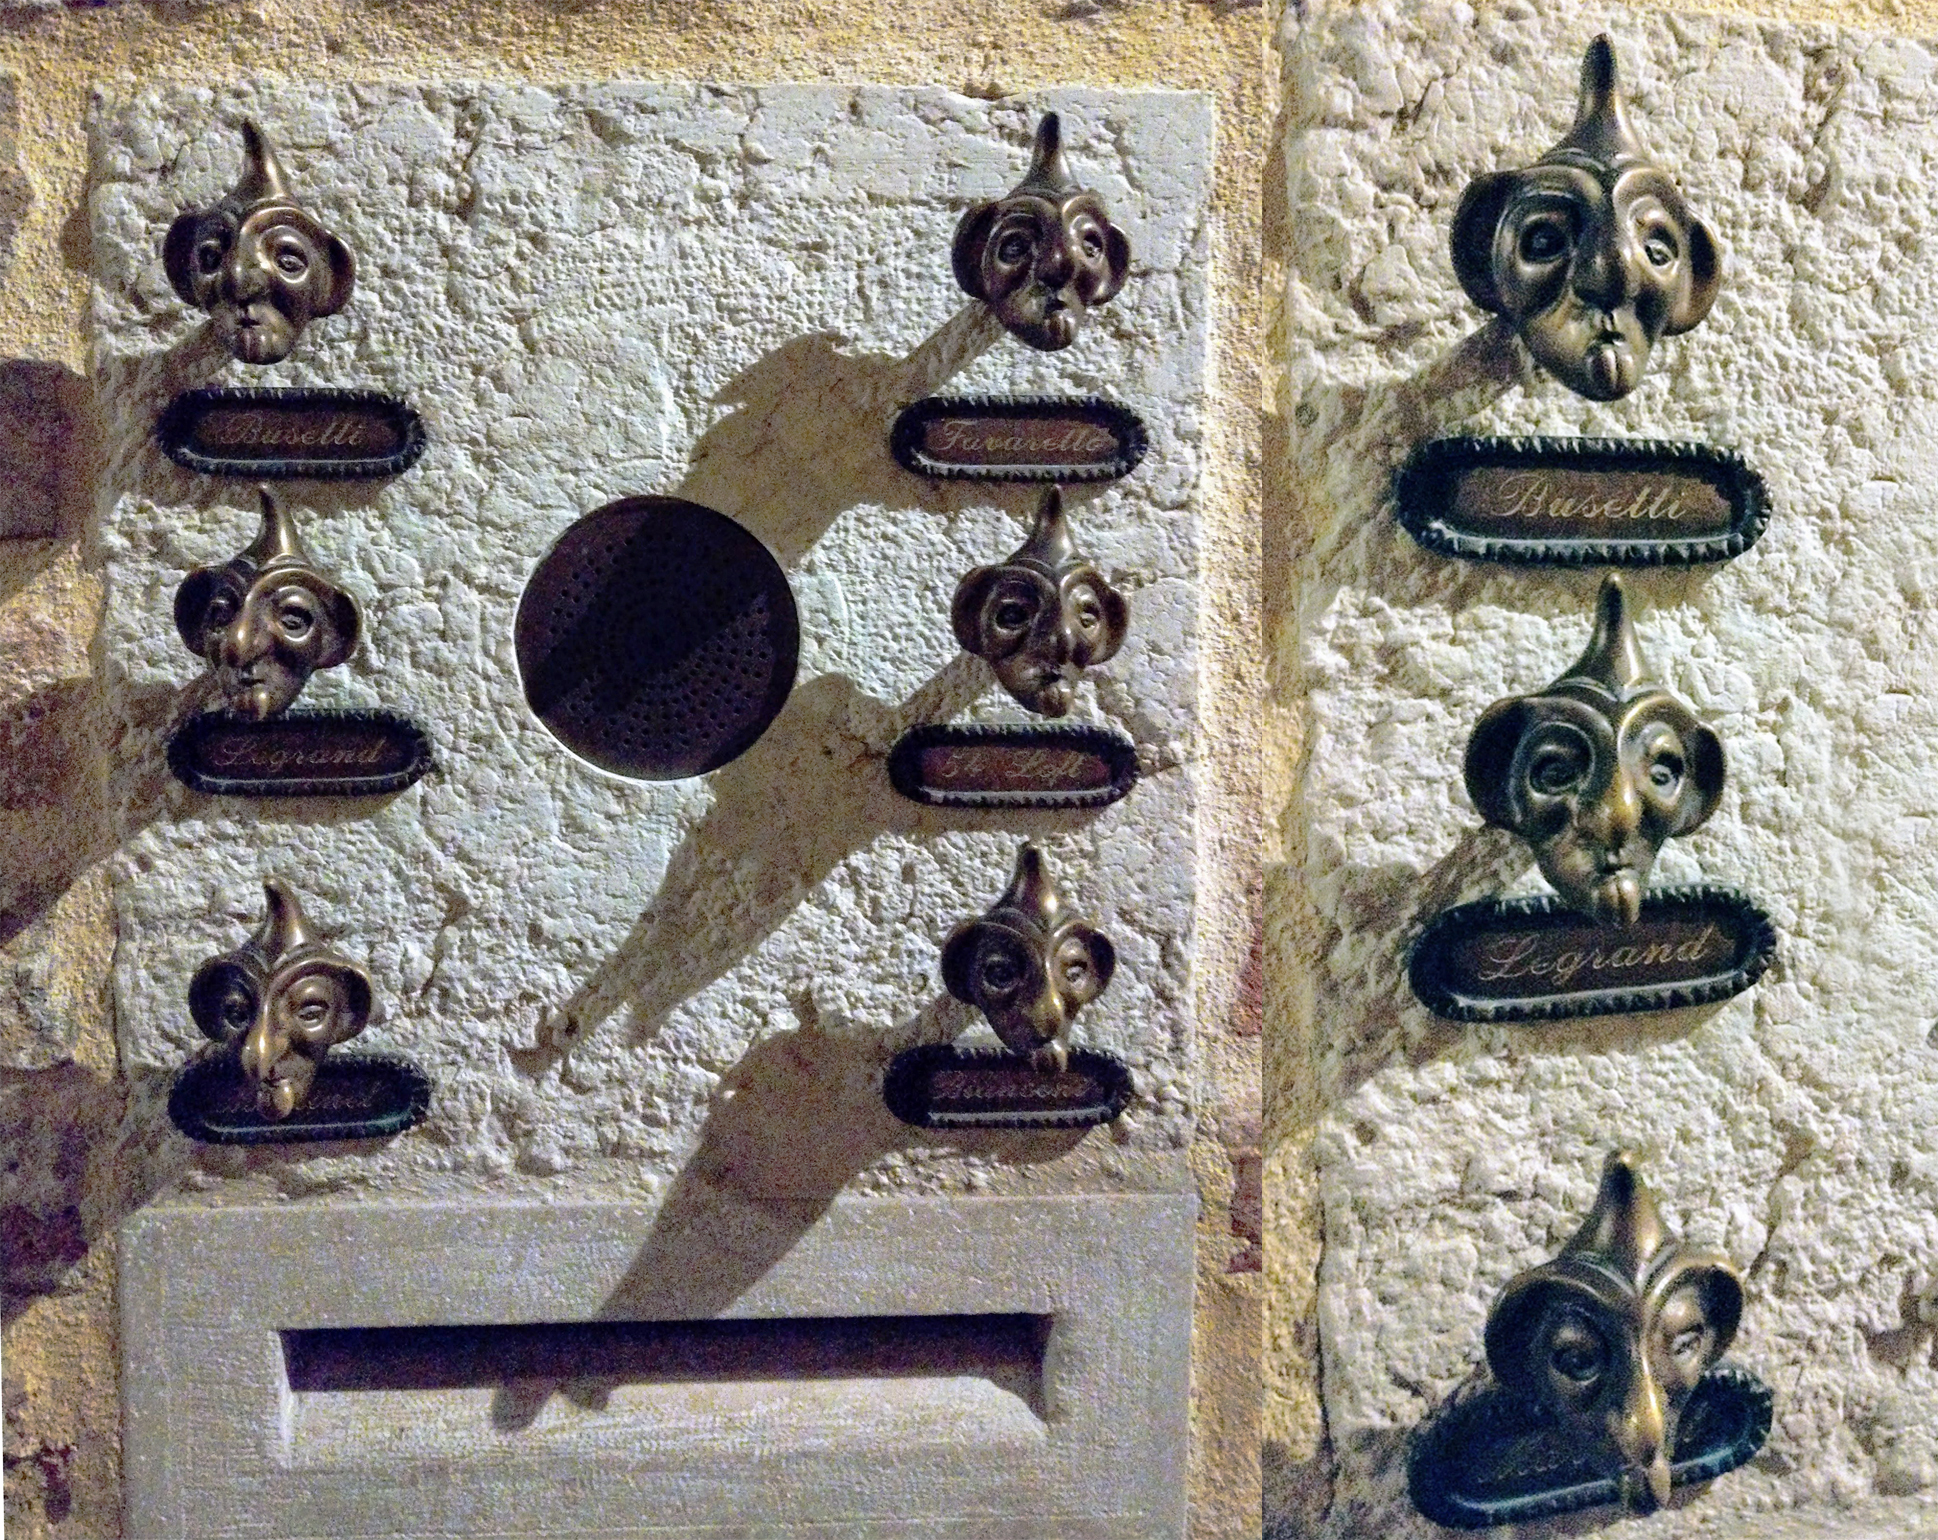 It was a coincidence when I encountered these elves-like bell design in an alley on night. I was fond of their facial details with the pointed hats and jaws and they comprehended well with the family’s name plates and the stone surfaces.